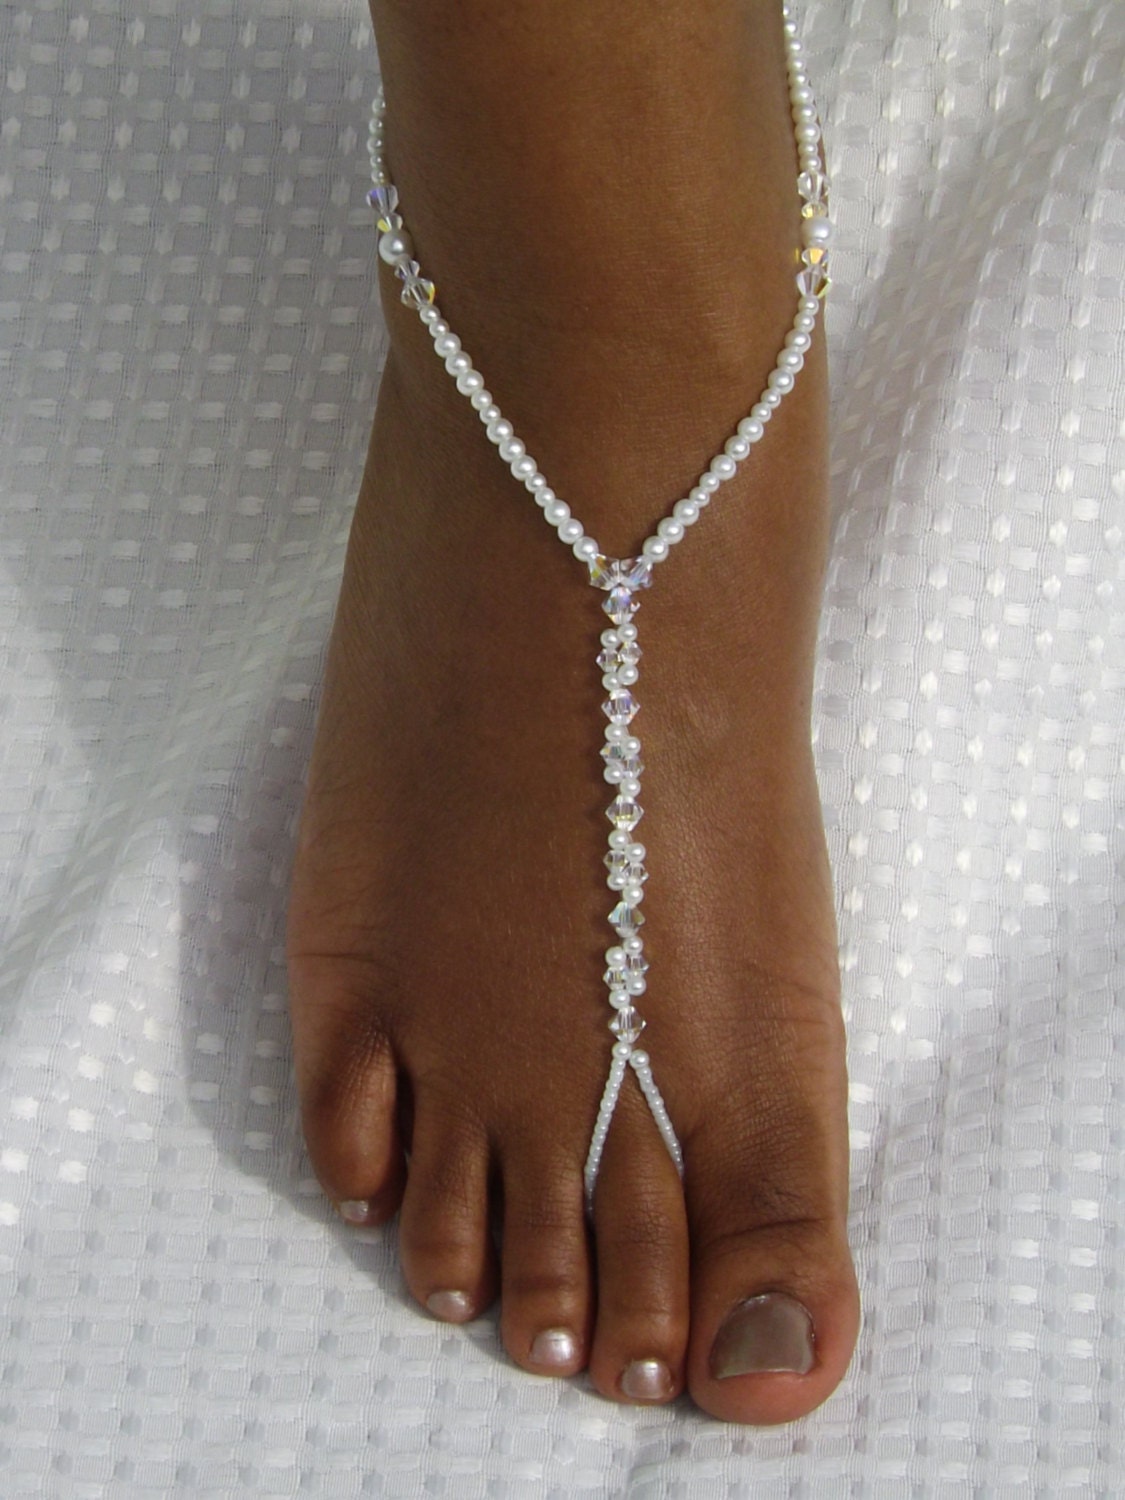 Beach Wedding Barefoot Sandals Foot Jewelry by SubtleExpressions